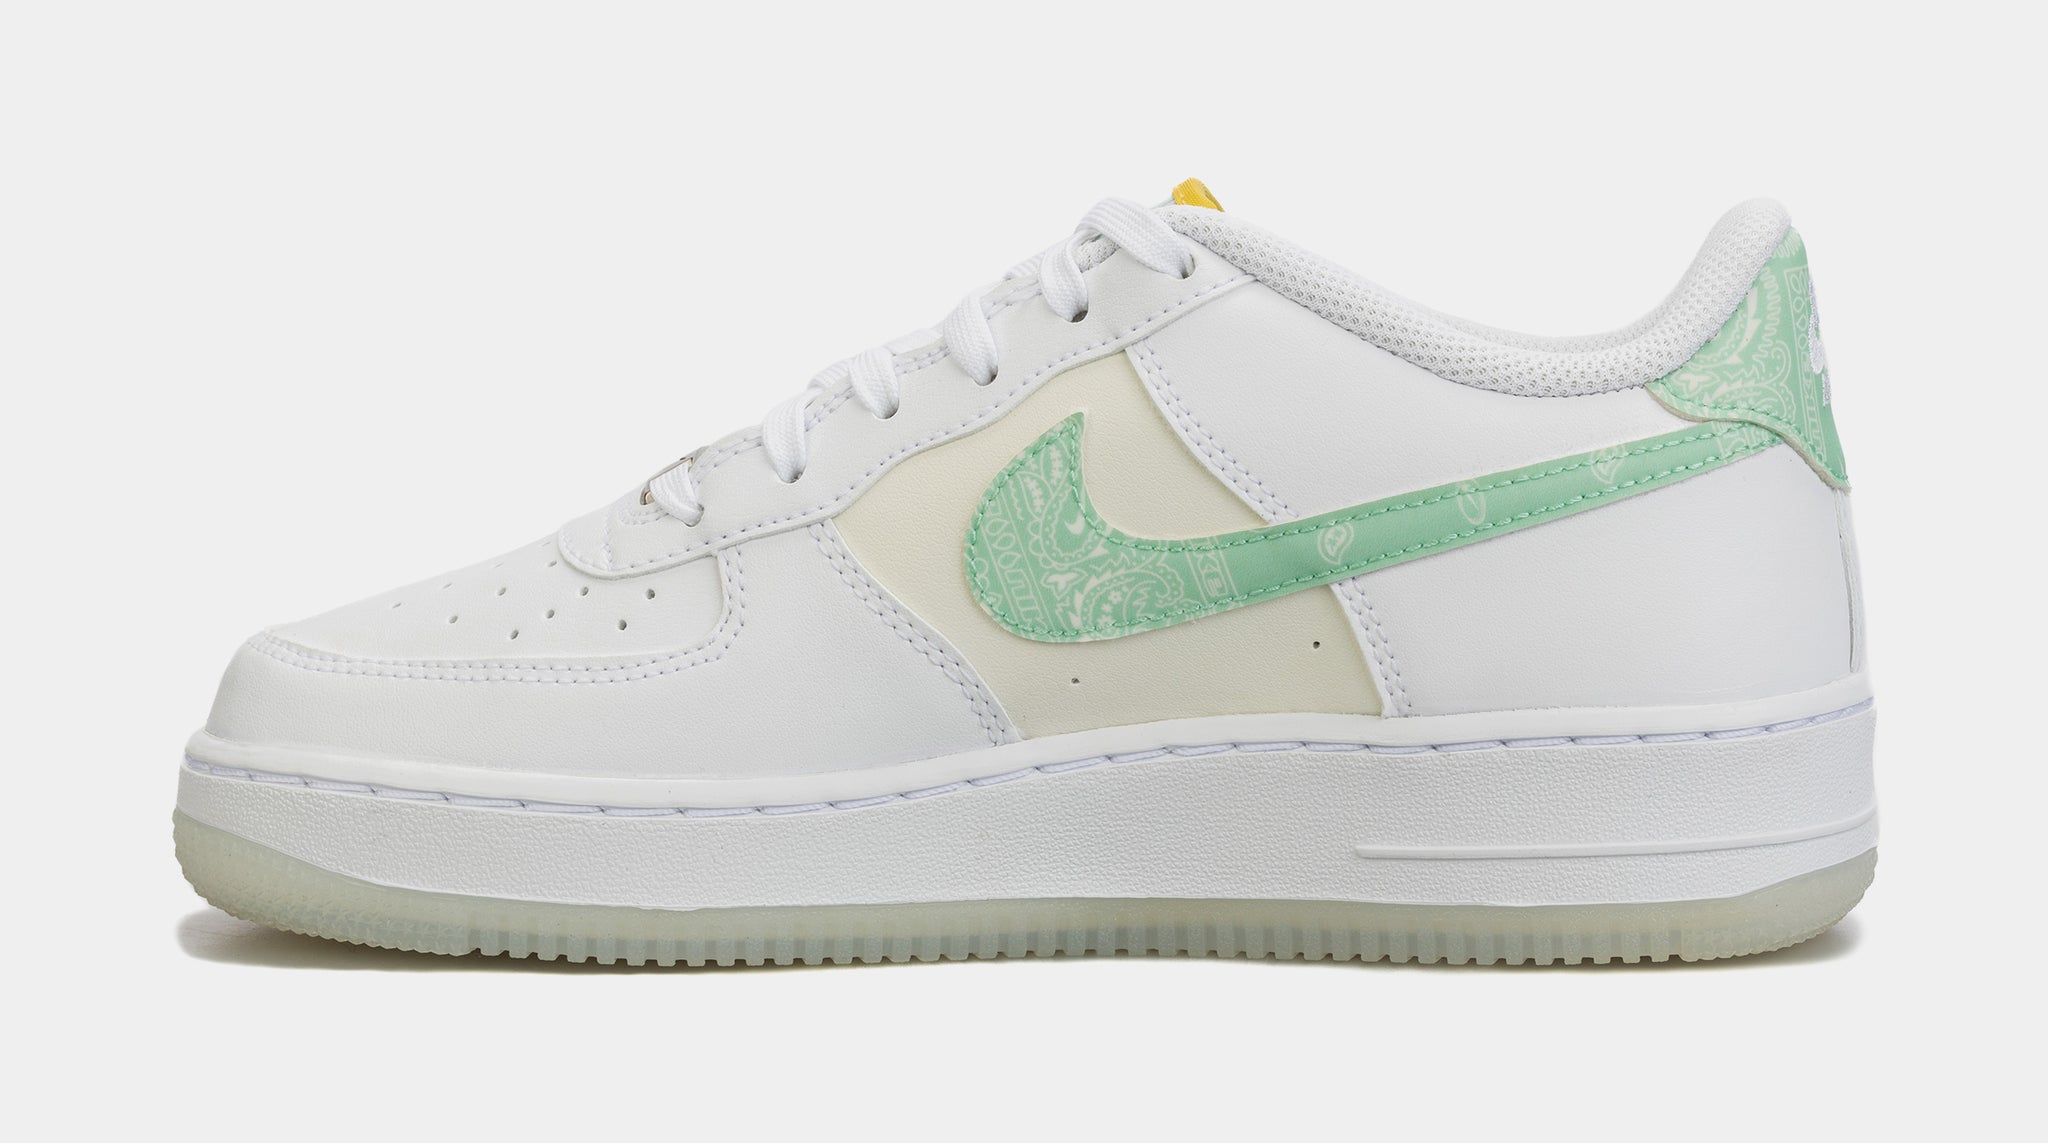 Nike Air Force 1 LV8 Grade School Lifestyle Shoes White Green 